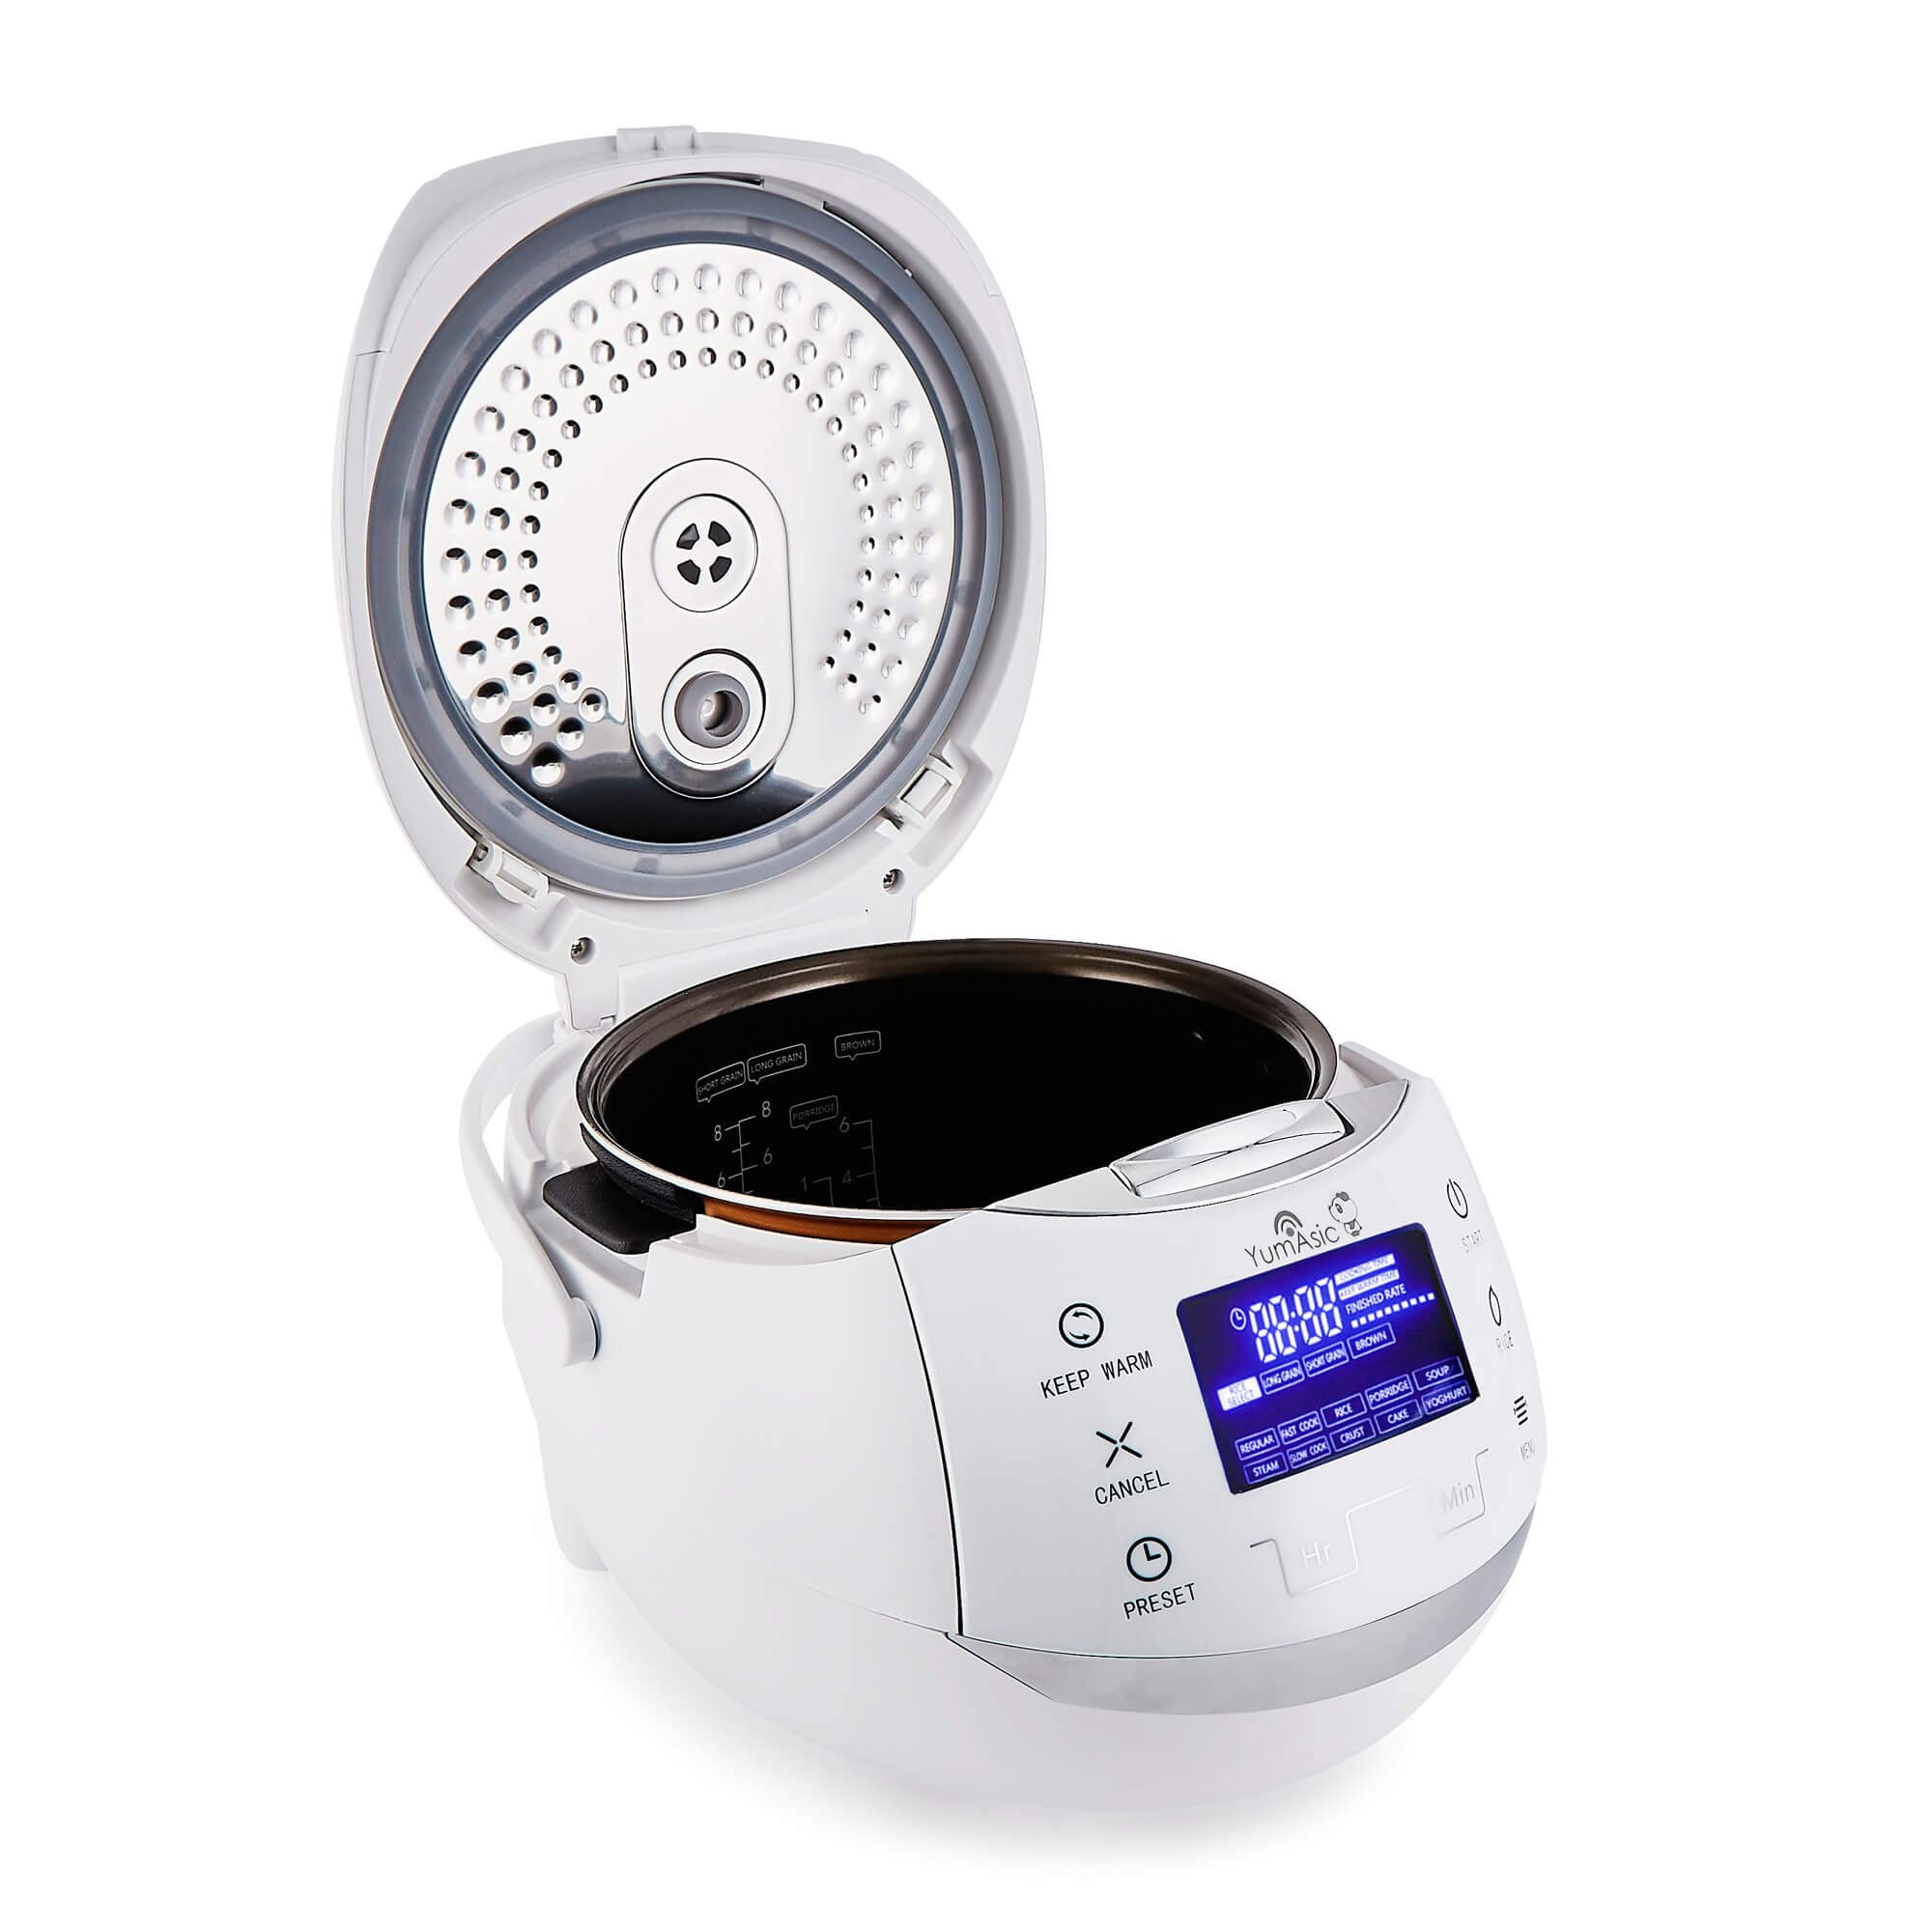 Yum Asia Sakura Rice Cooker with Ceramic Bowl and Advanced Fuzzy Logic (8 Cup, 1.5 Litre) 6 Rice Cook Functions, 6 Multicook Functions, Motouch LED Display, 120V Power (White and Siver)